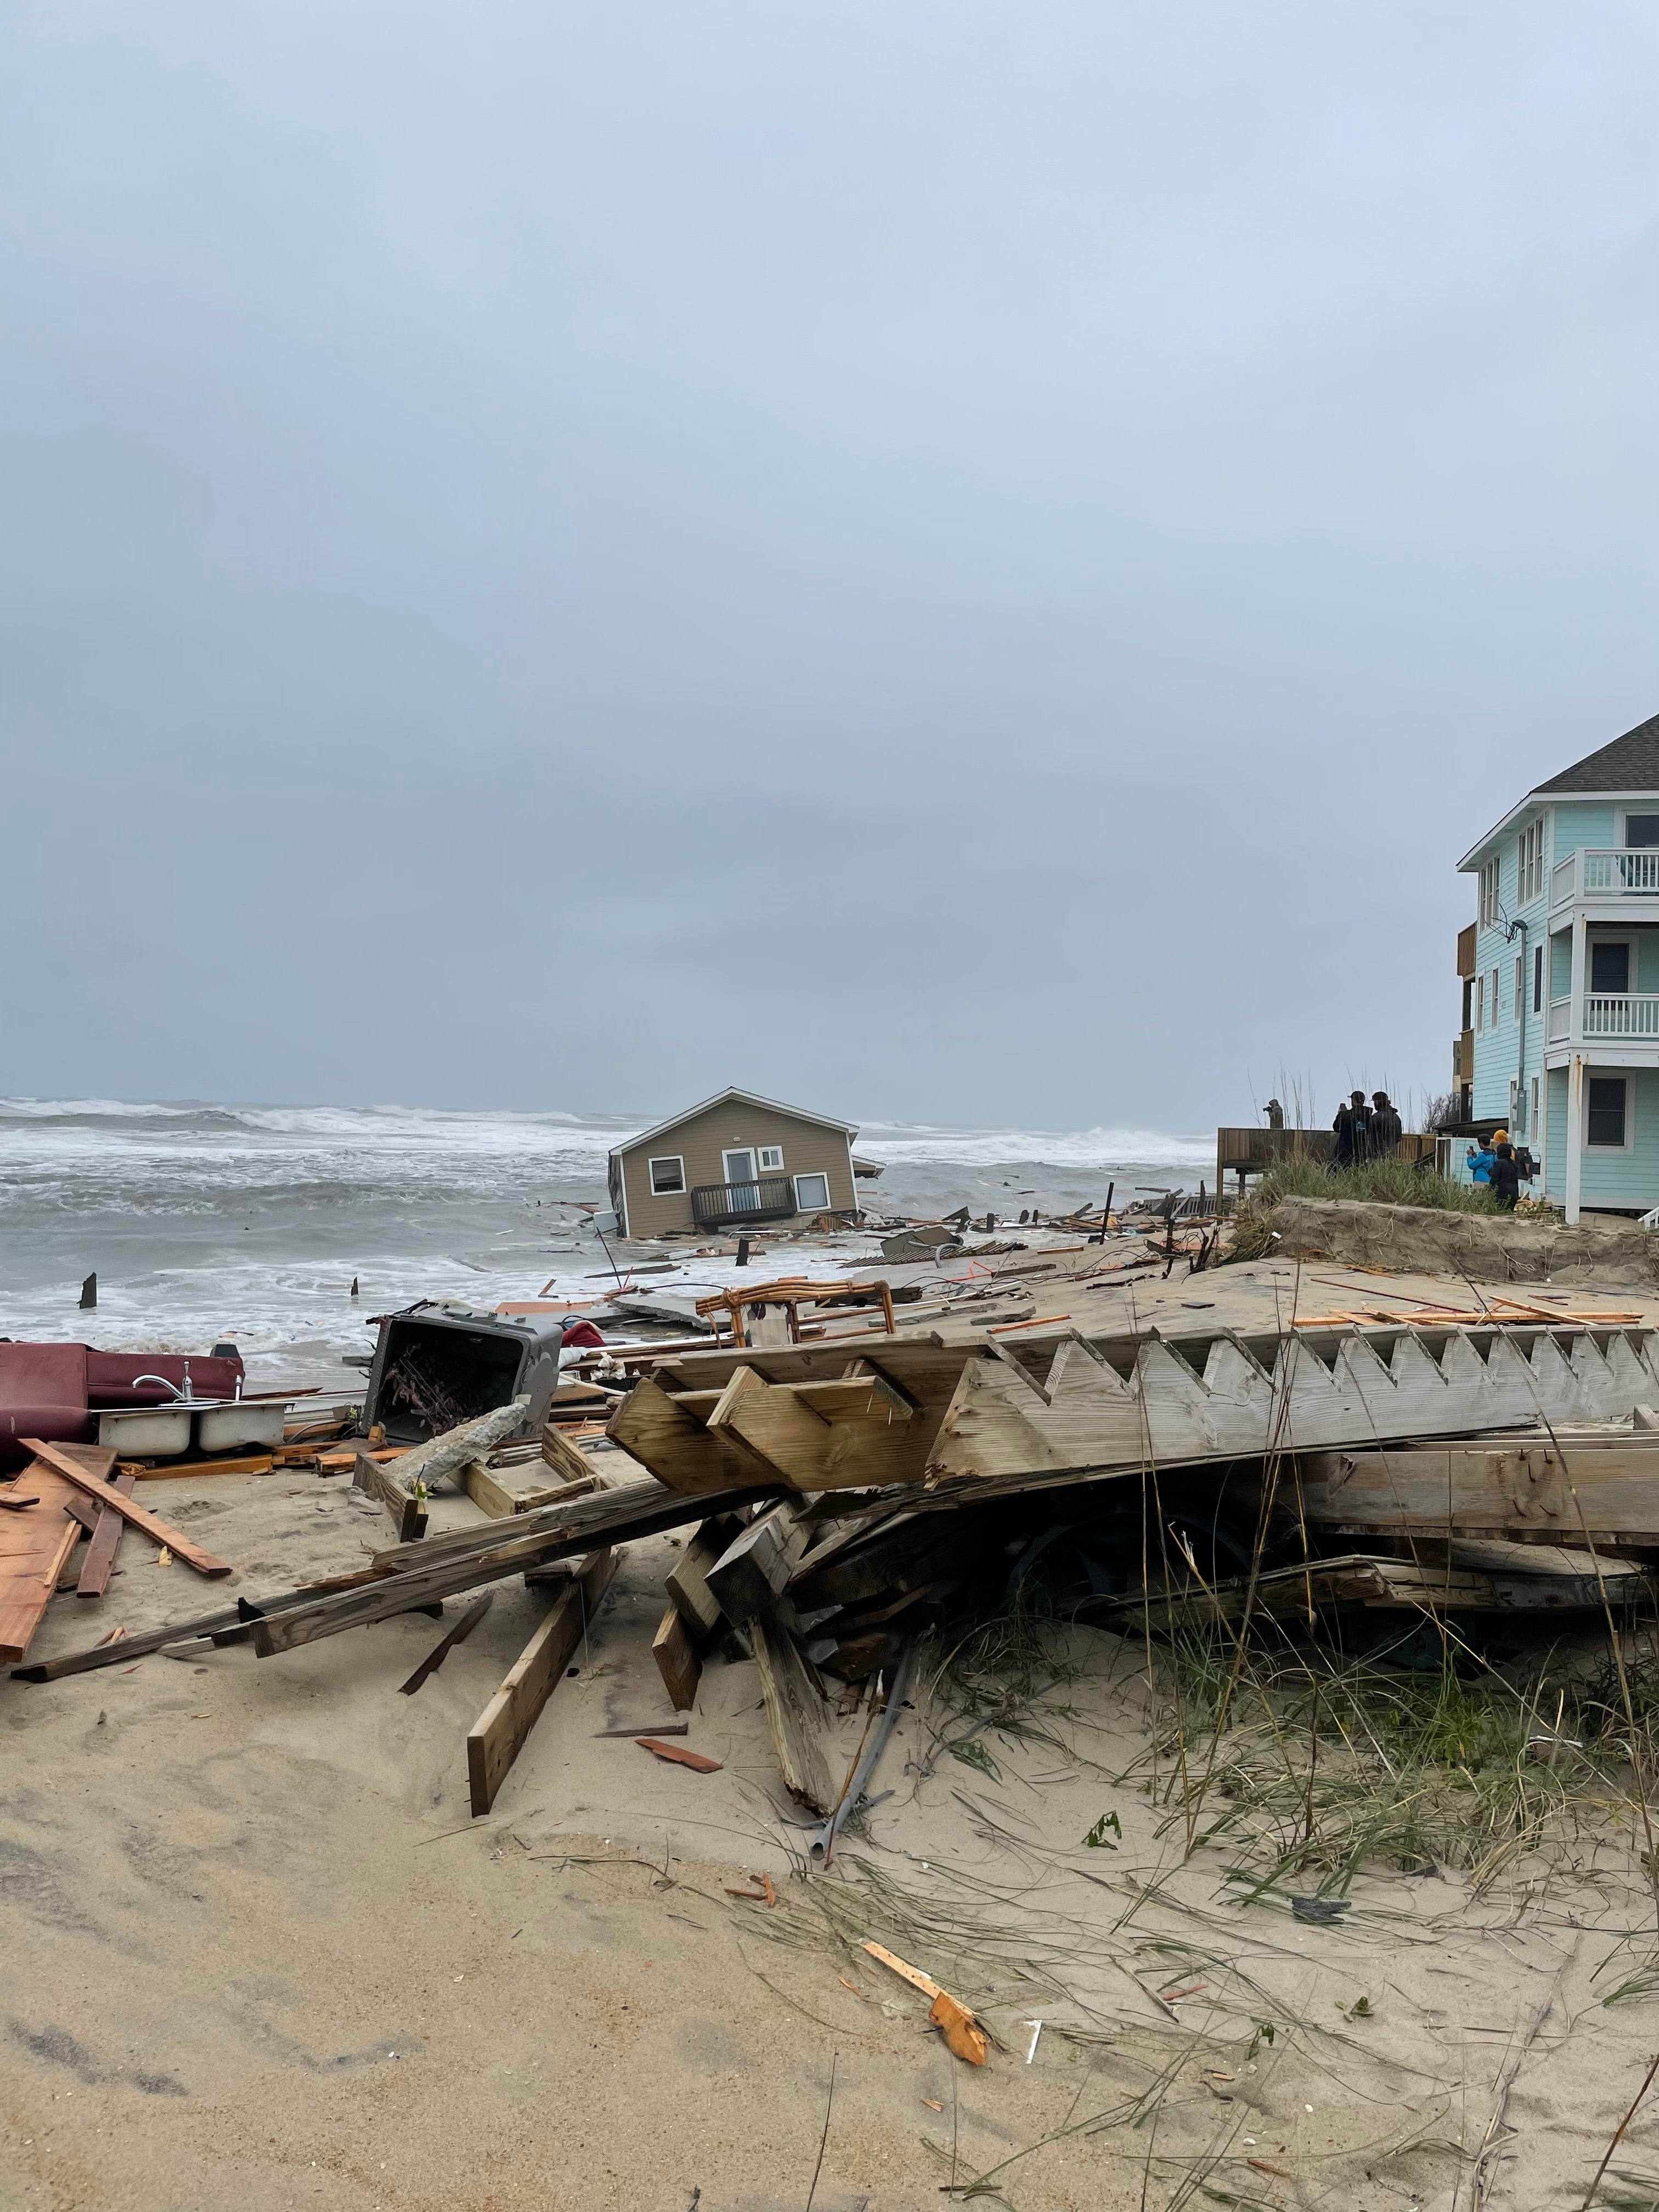 After it fell, the second house to collapse on Ocean Drive bobbed in the waves. (Photo: Cape Hatteras NPS / National Park Service, Fair Use)